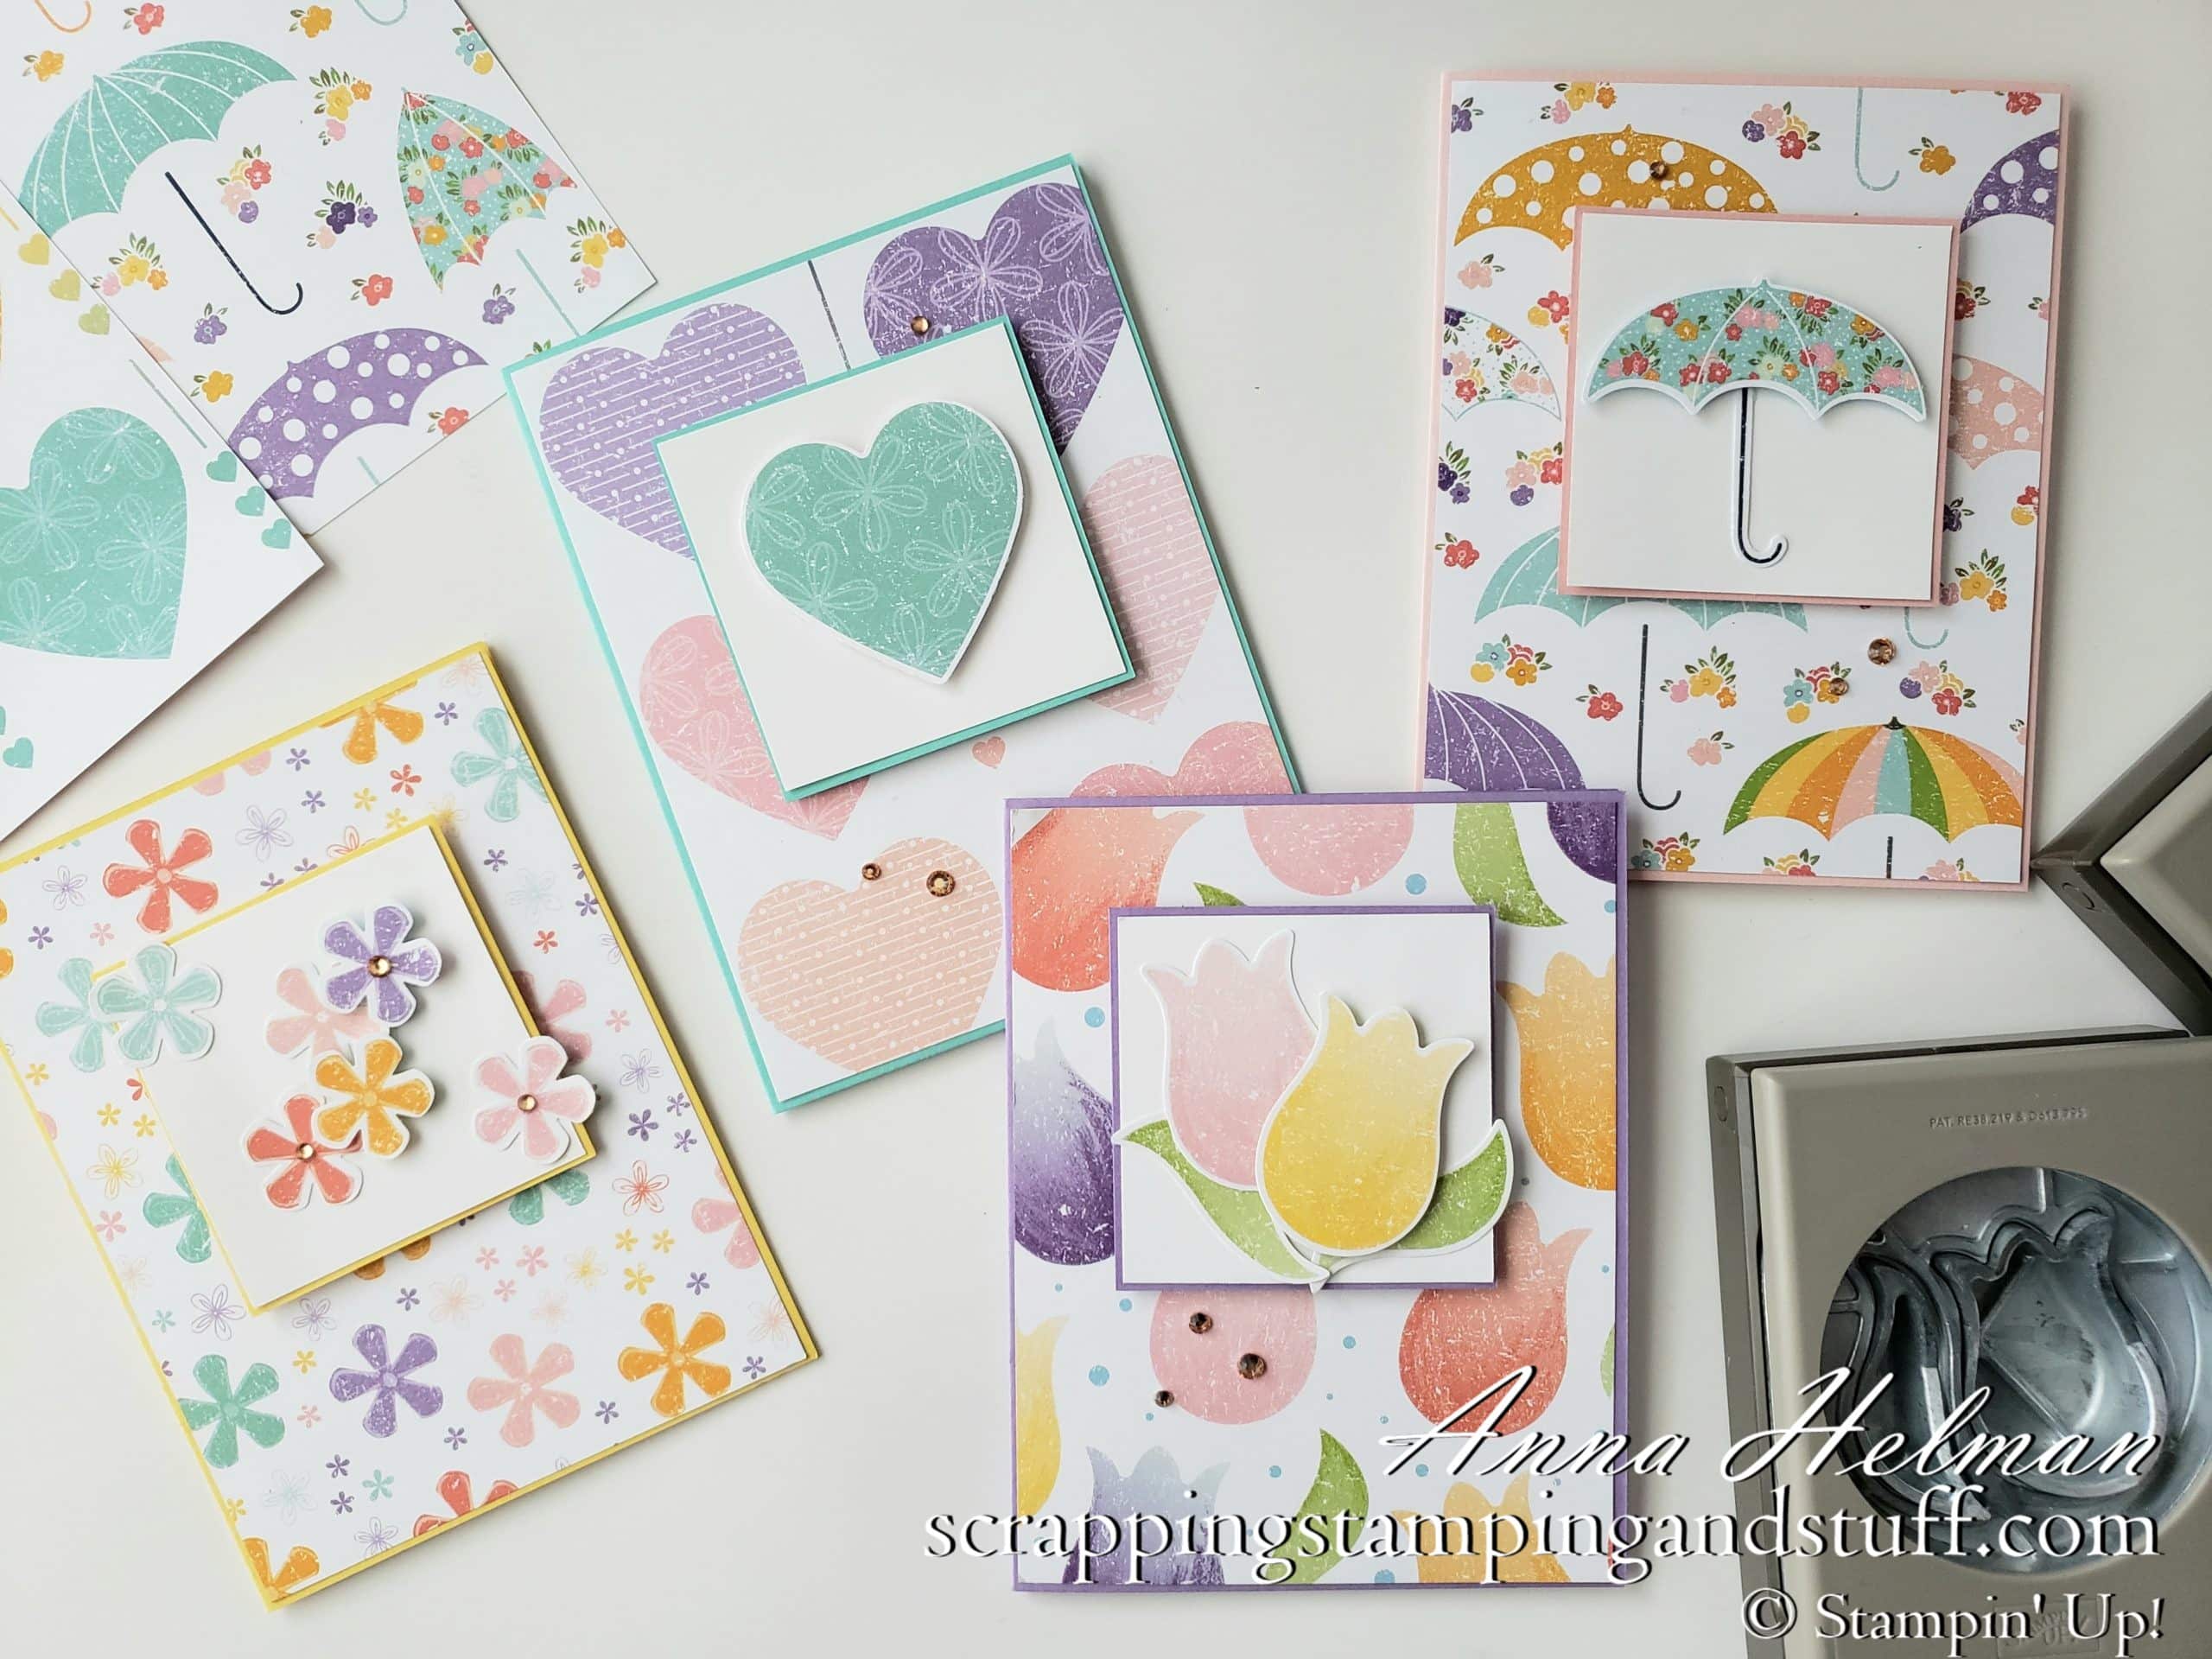 Stampin Up Coordination Product Release is Amazing!